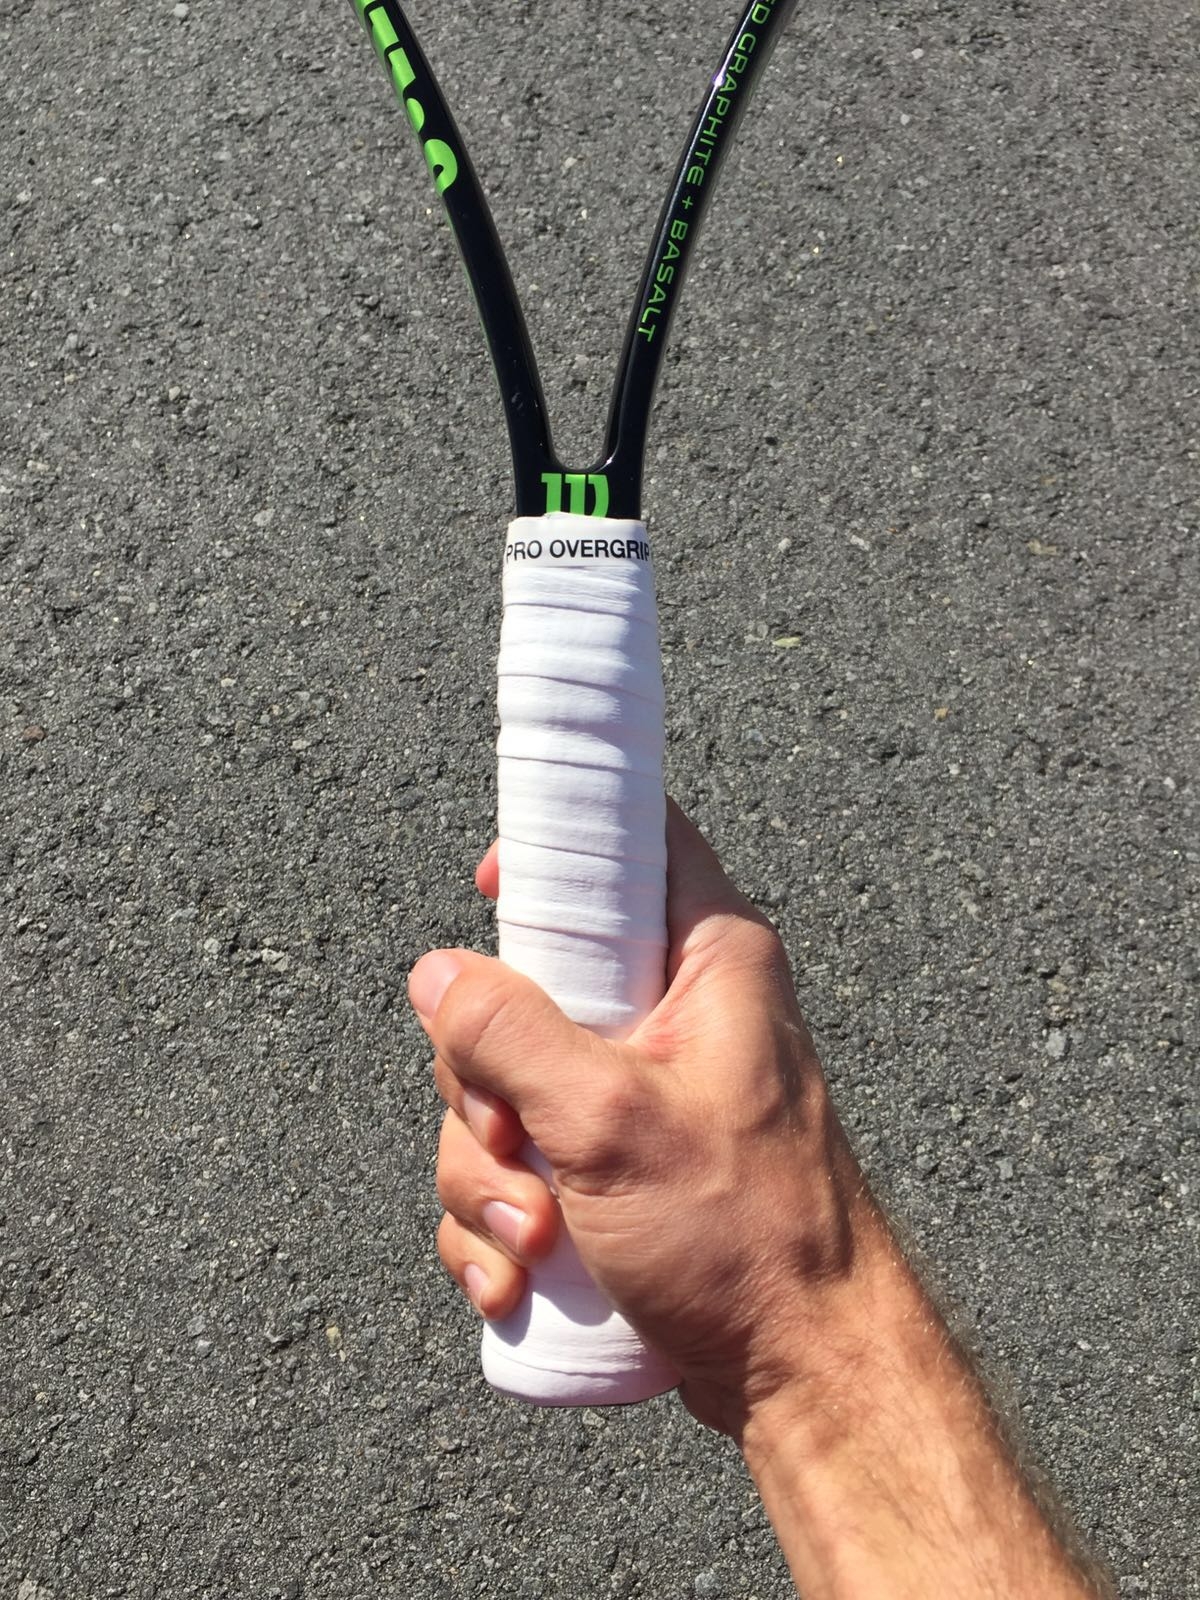 Tennis Grip Guide - Different Grips Explained and Demonstrated